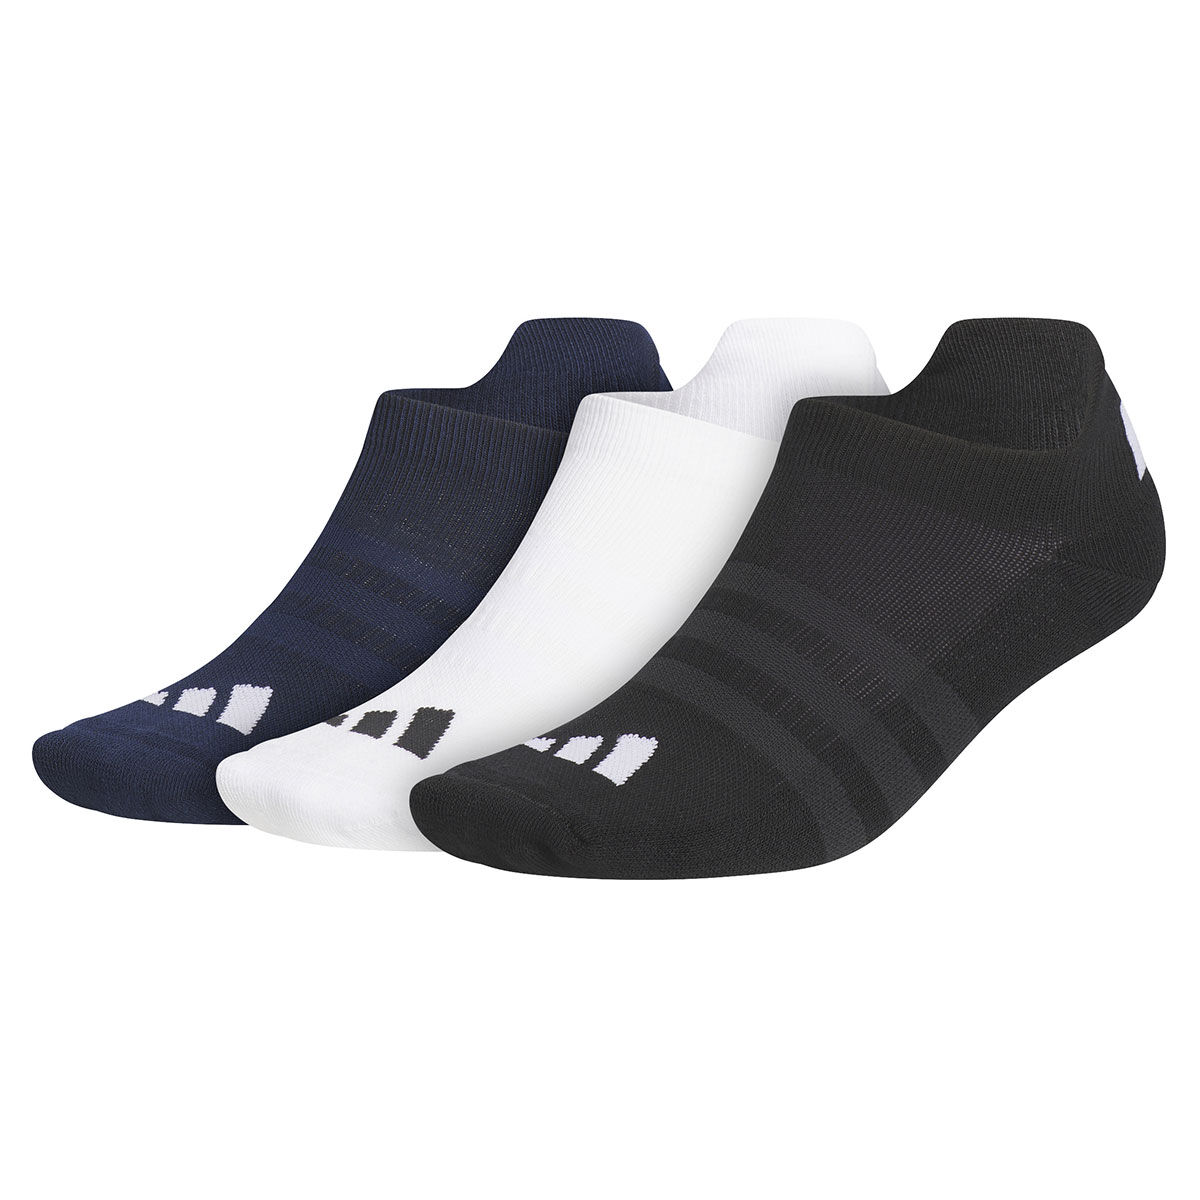 adidas Golf Men’s Navy Blue, White and Black Pack of 3 Ankle Golf Socks | American Golf, One Size